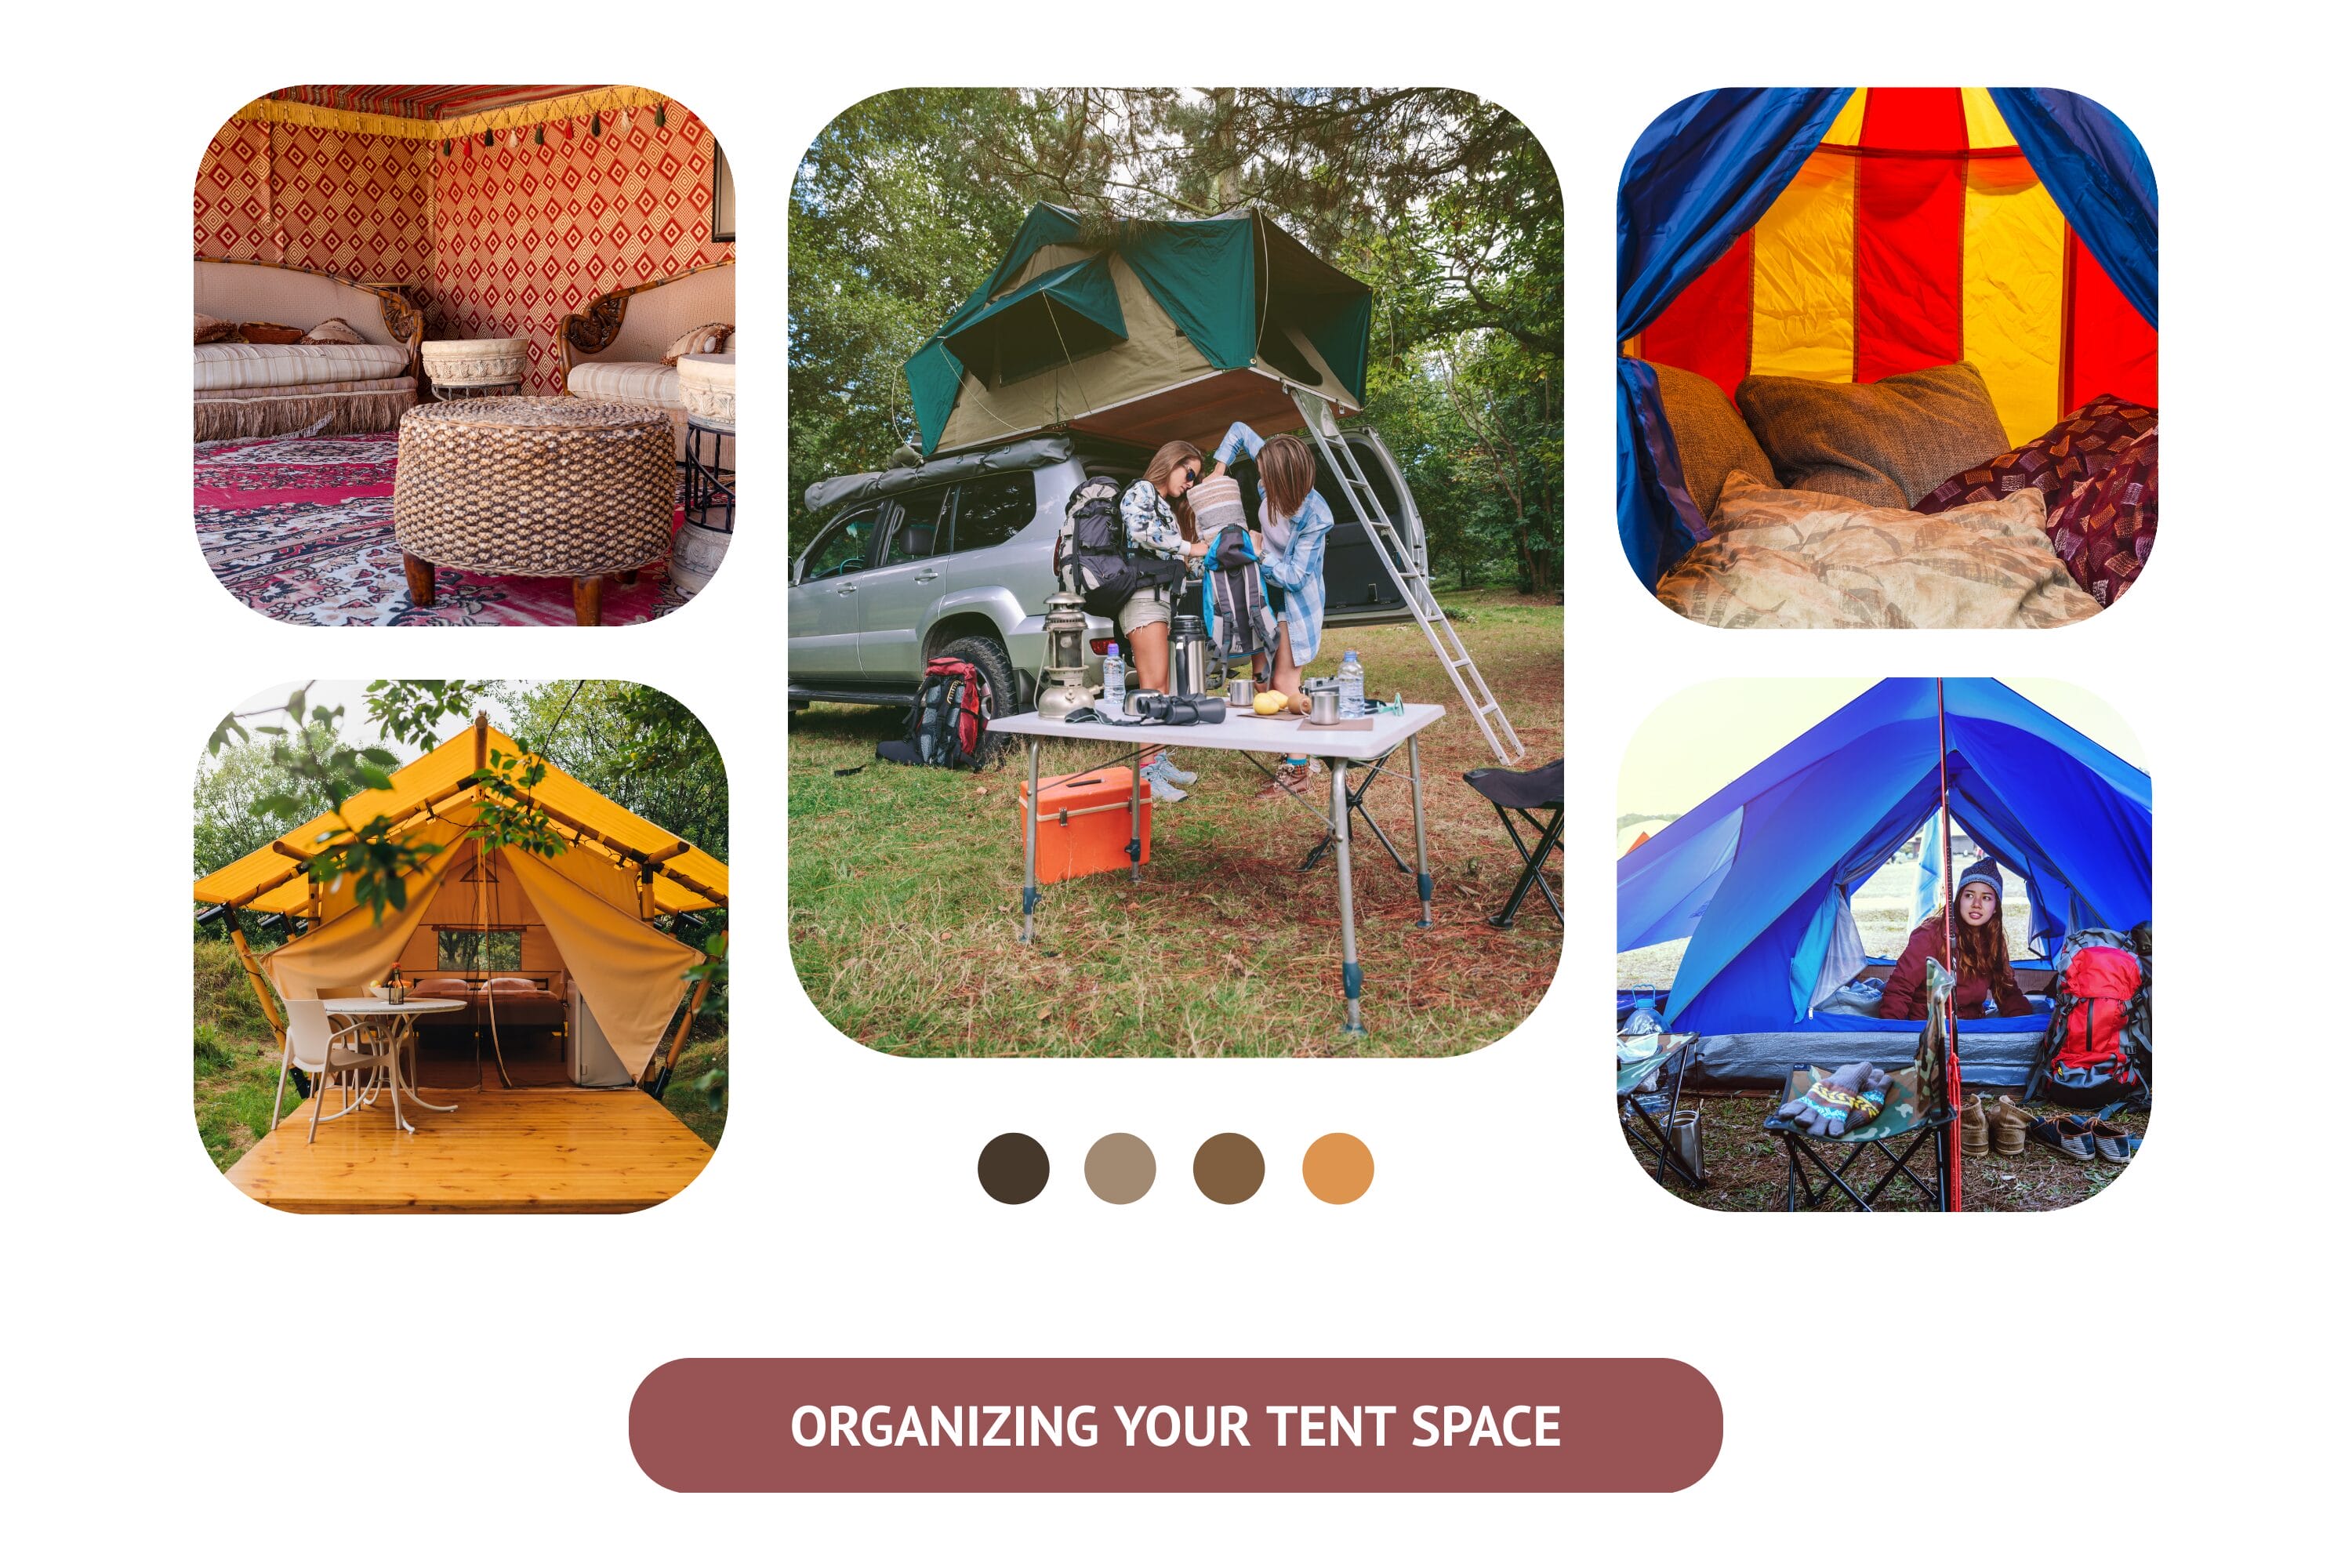 Organizing Your Tent Space